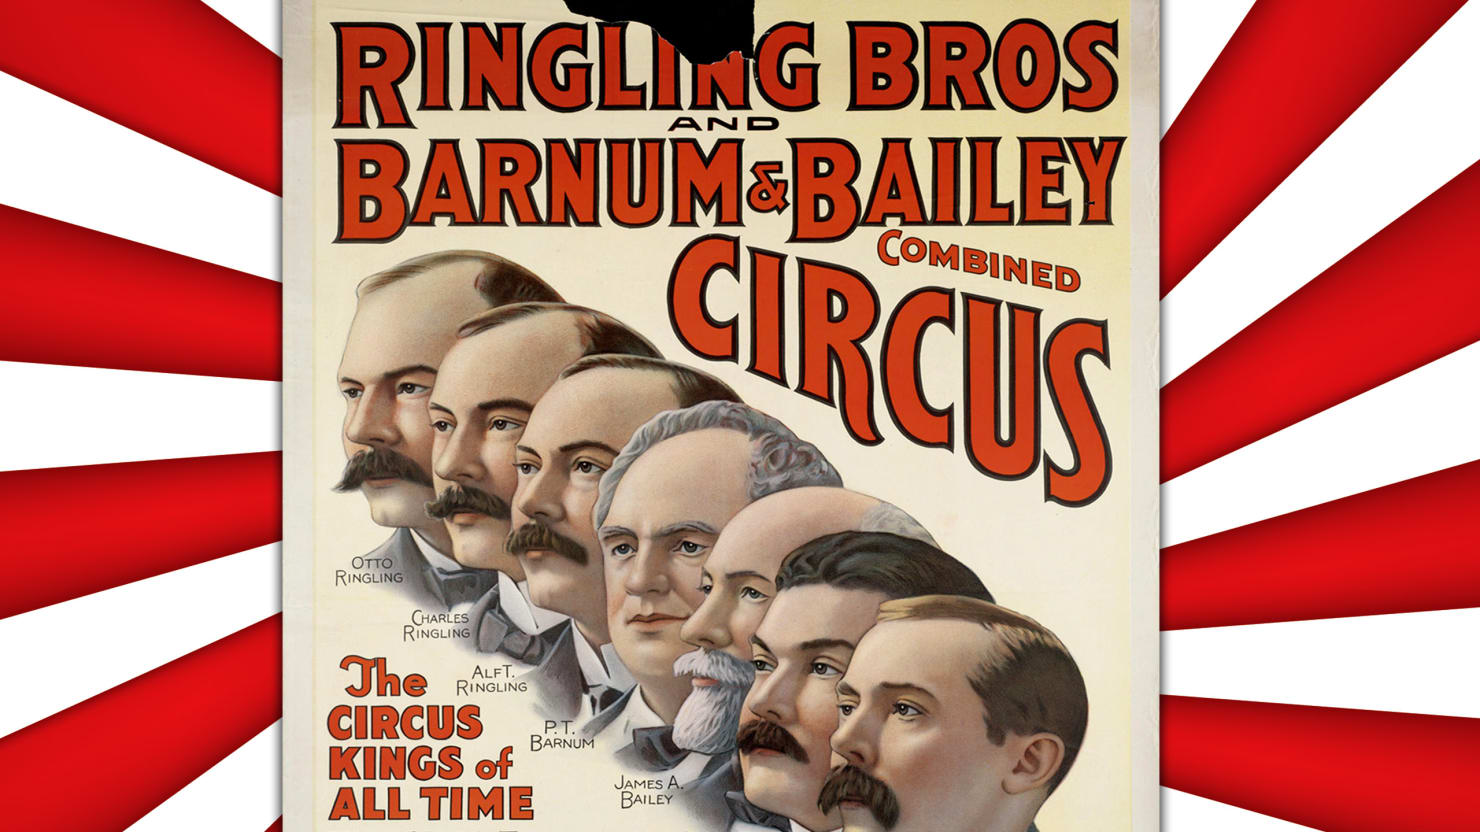 The Fake News Pioneer of Ringling Bros and Barnum Bailey Circus